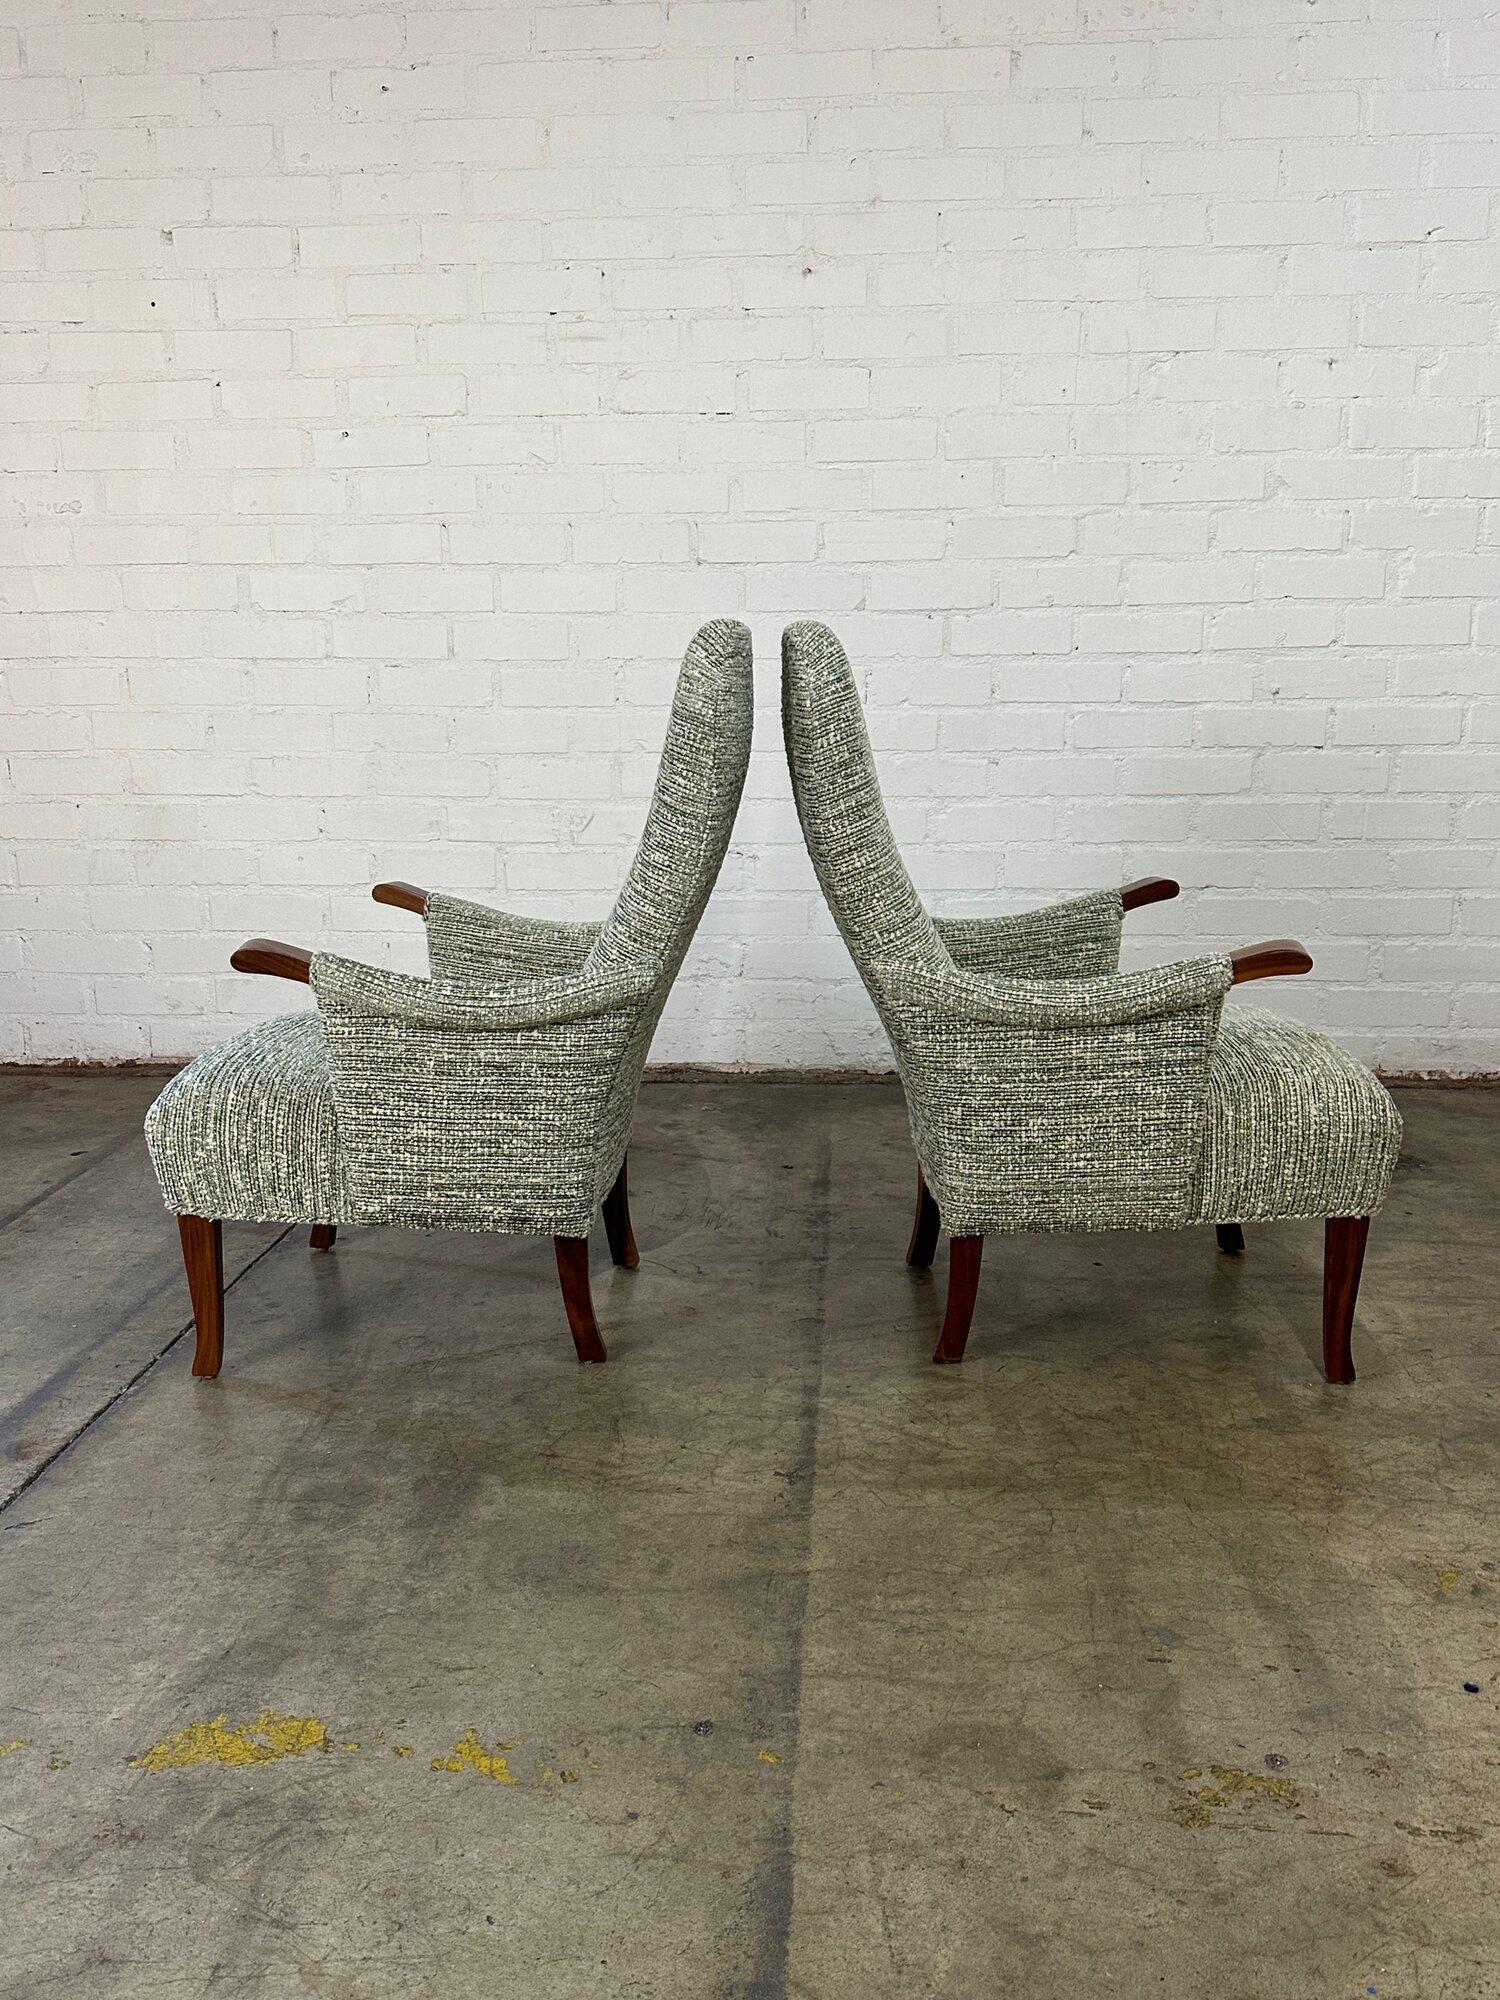 W27 D28 H39 SW22 SD19.5 SH16 AH22

Custom made Lounge chairs in green boucle. Chairs feature upholstered wooden frames with solid walnut rounded arm rests and solid sculpted legs.

*Price is for the pair.

Interested in this build and would like a